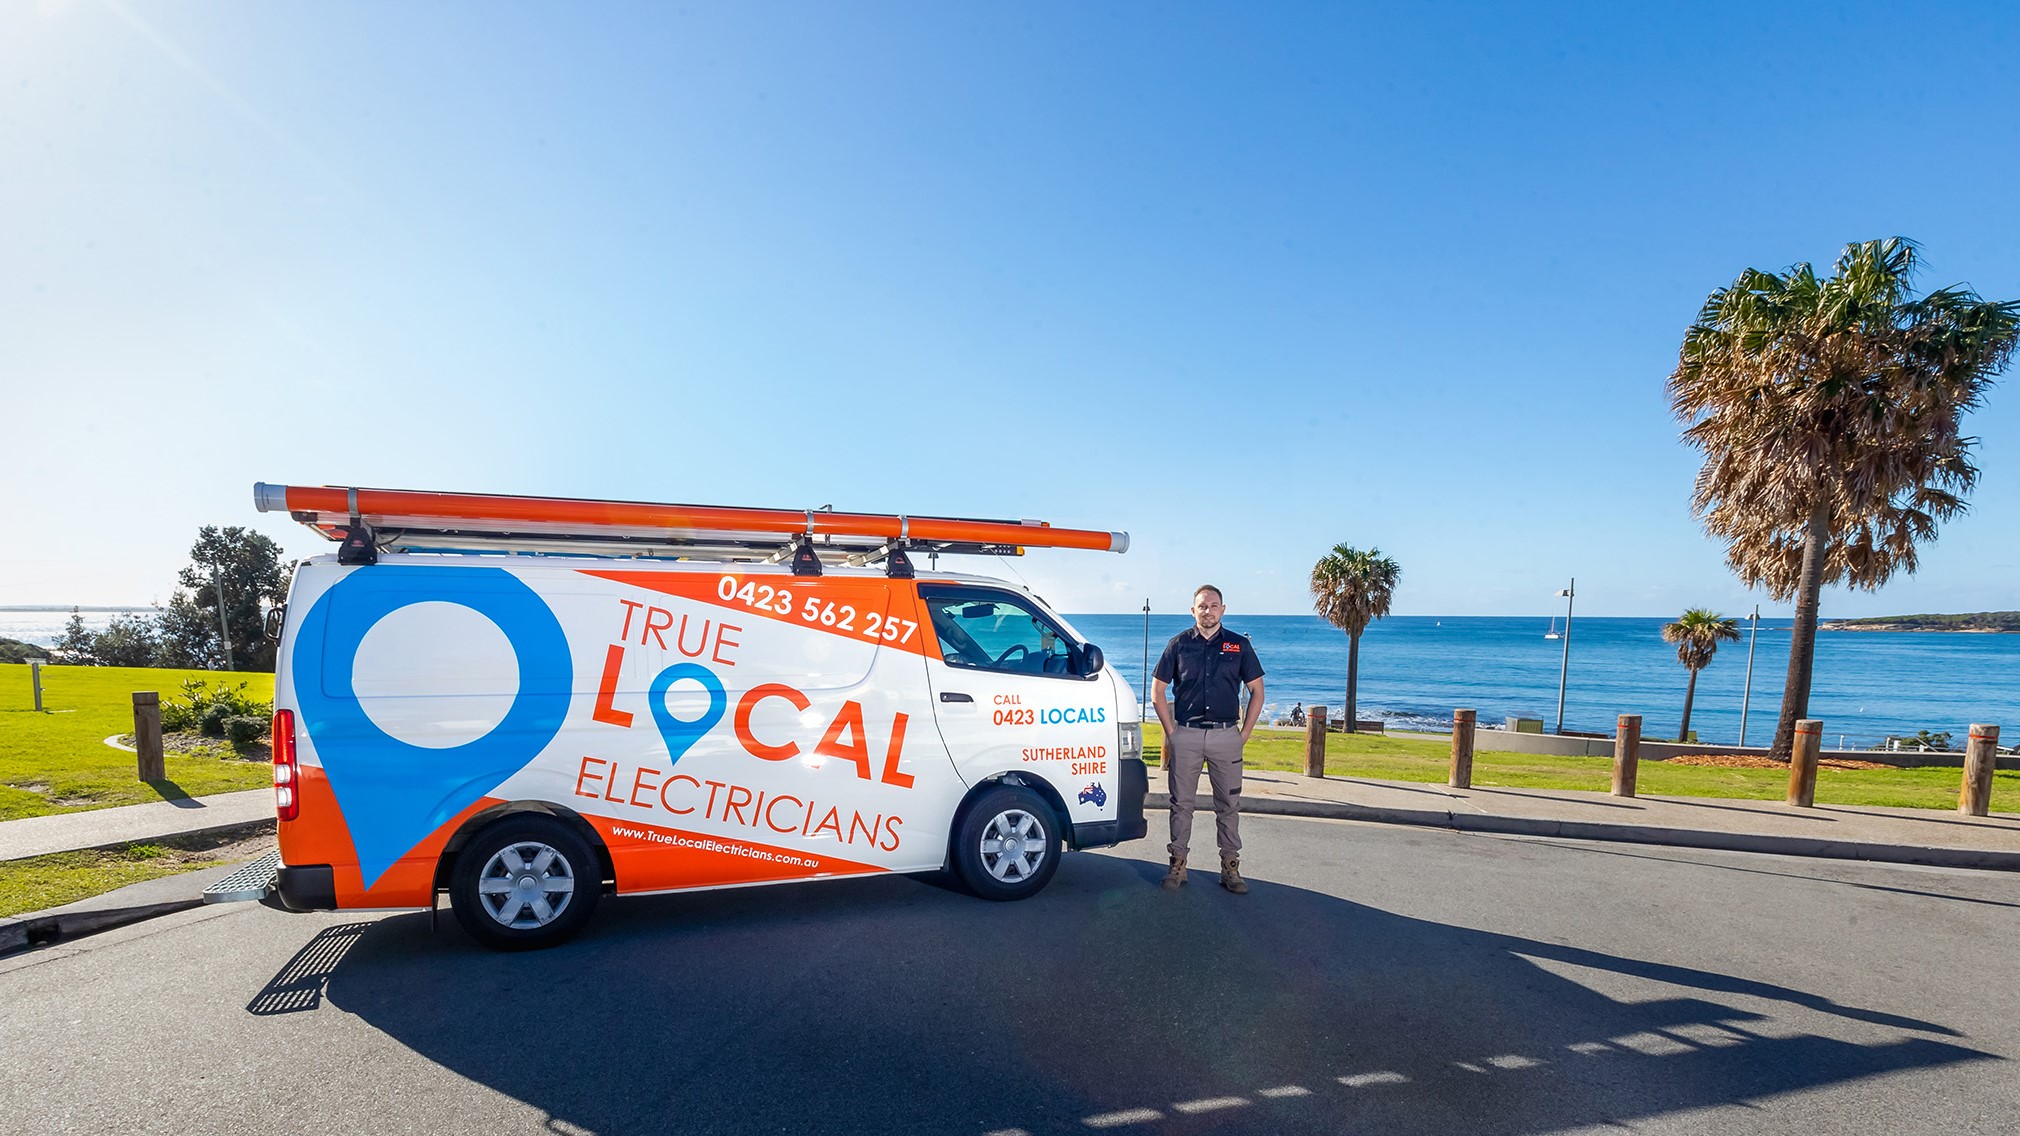 True-Local-Electricians-Sutherland-Shire-hero-homepage